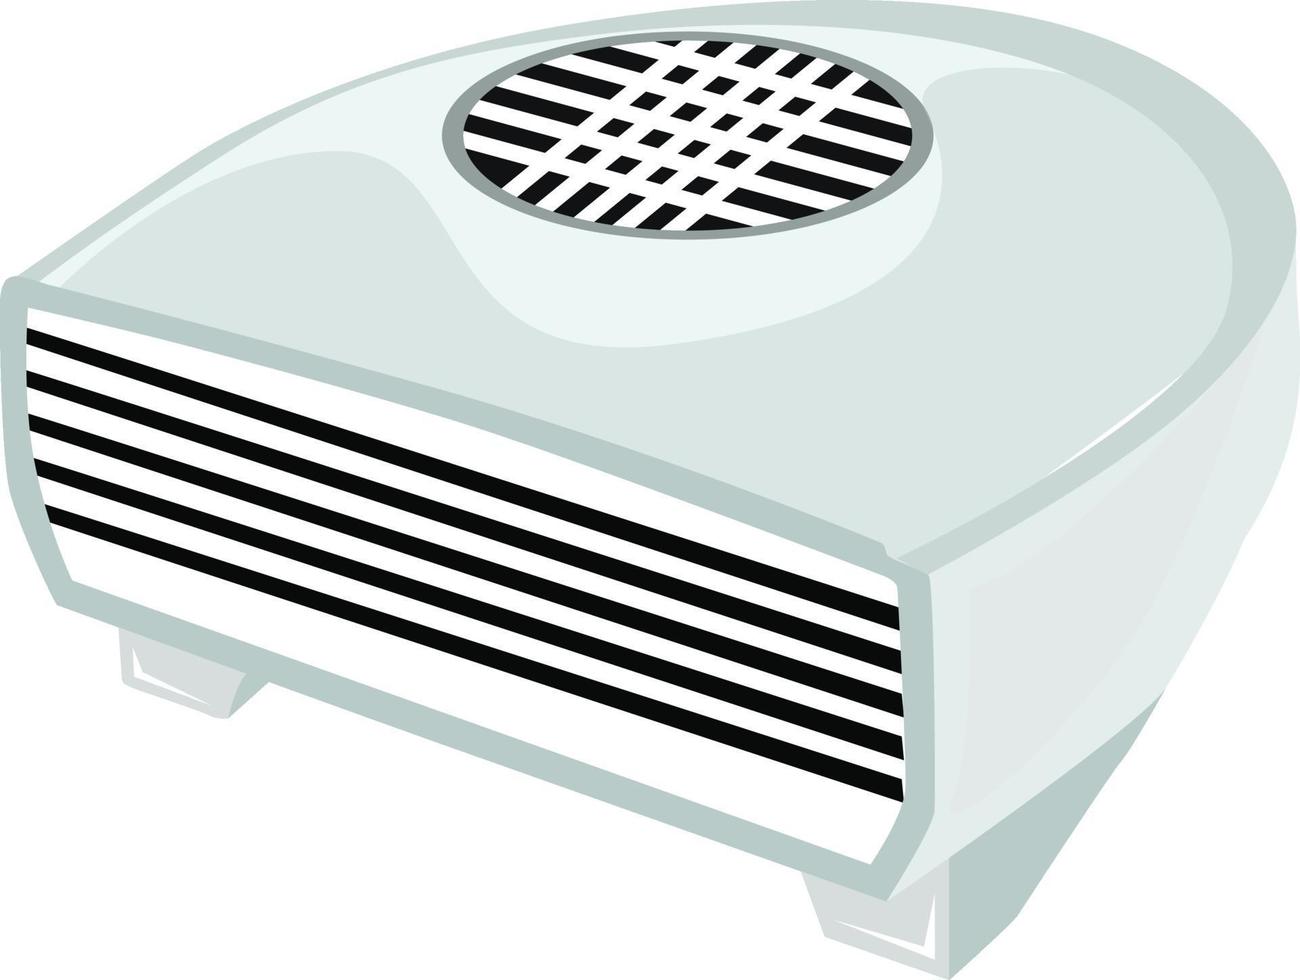 Small heater, illustration, vector on a white background.